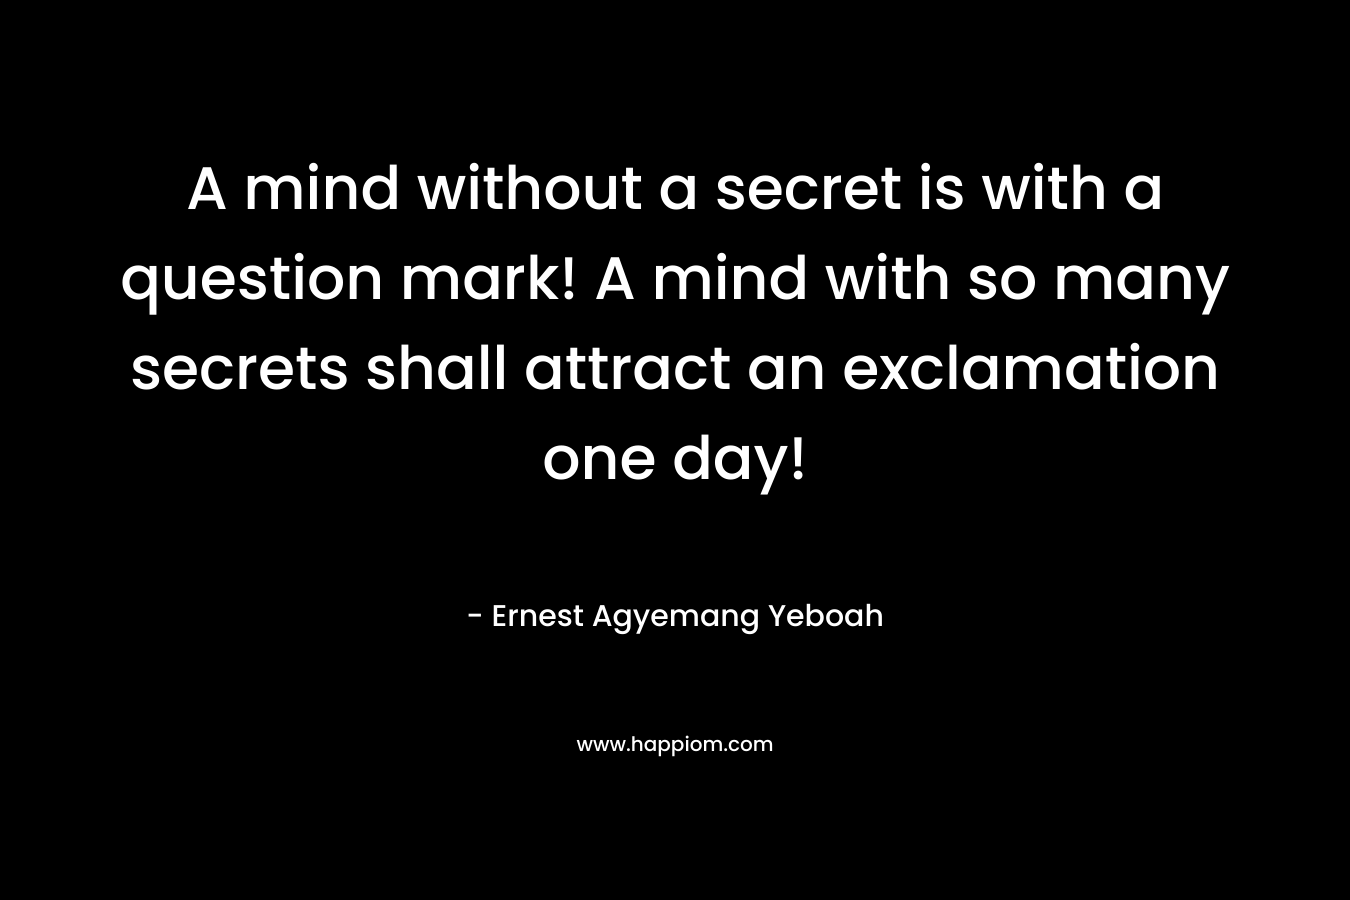 A mind without a secret is with a question mark! A mind with so many secrets shall attract an exclamation one day!